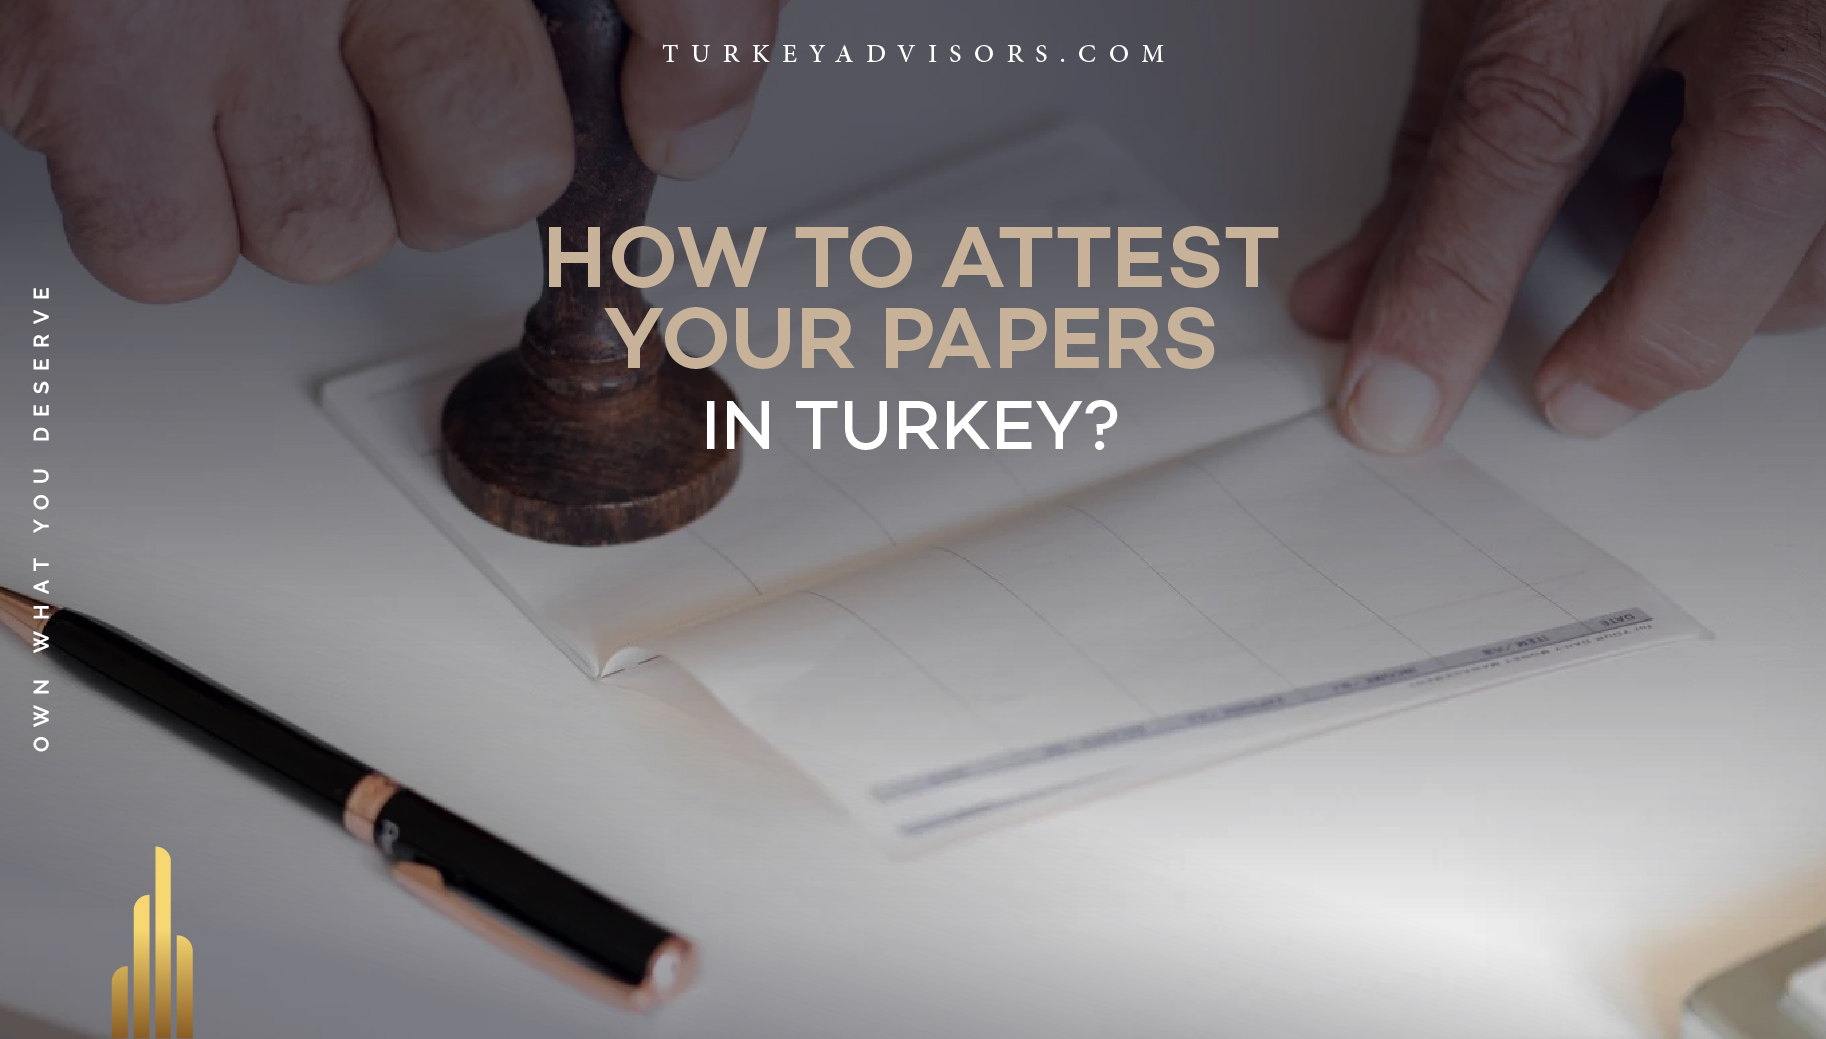 How to attest your papers in Turkey?